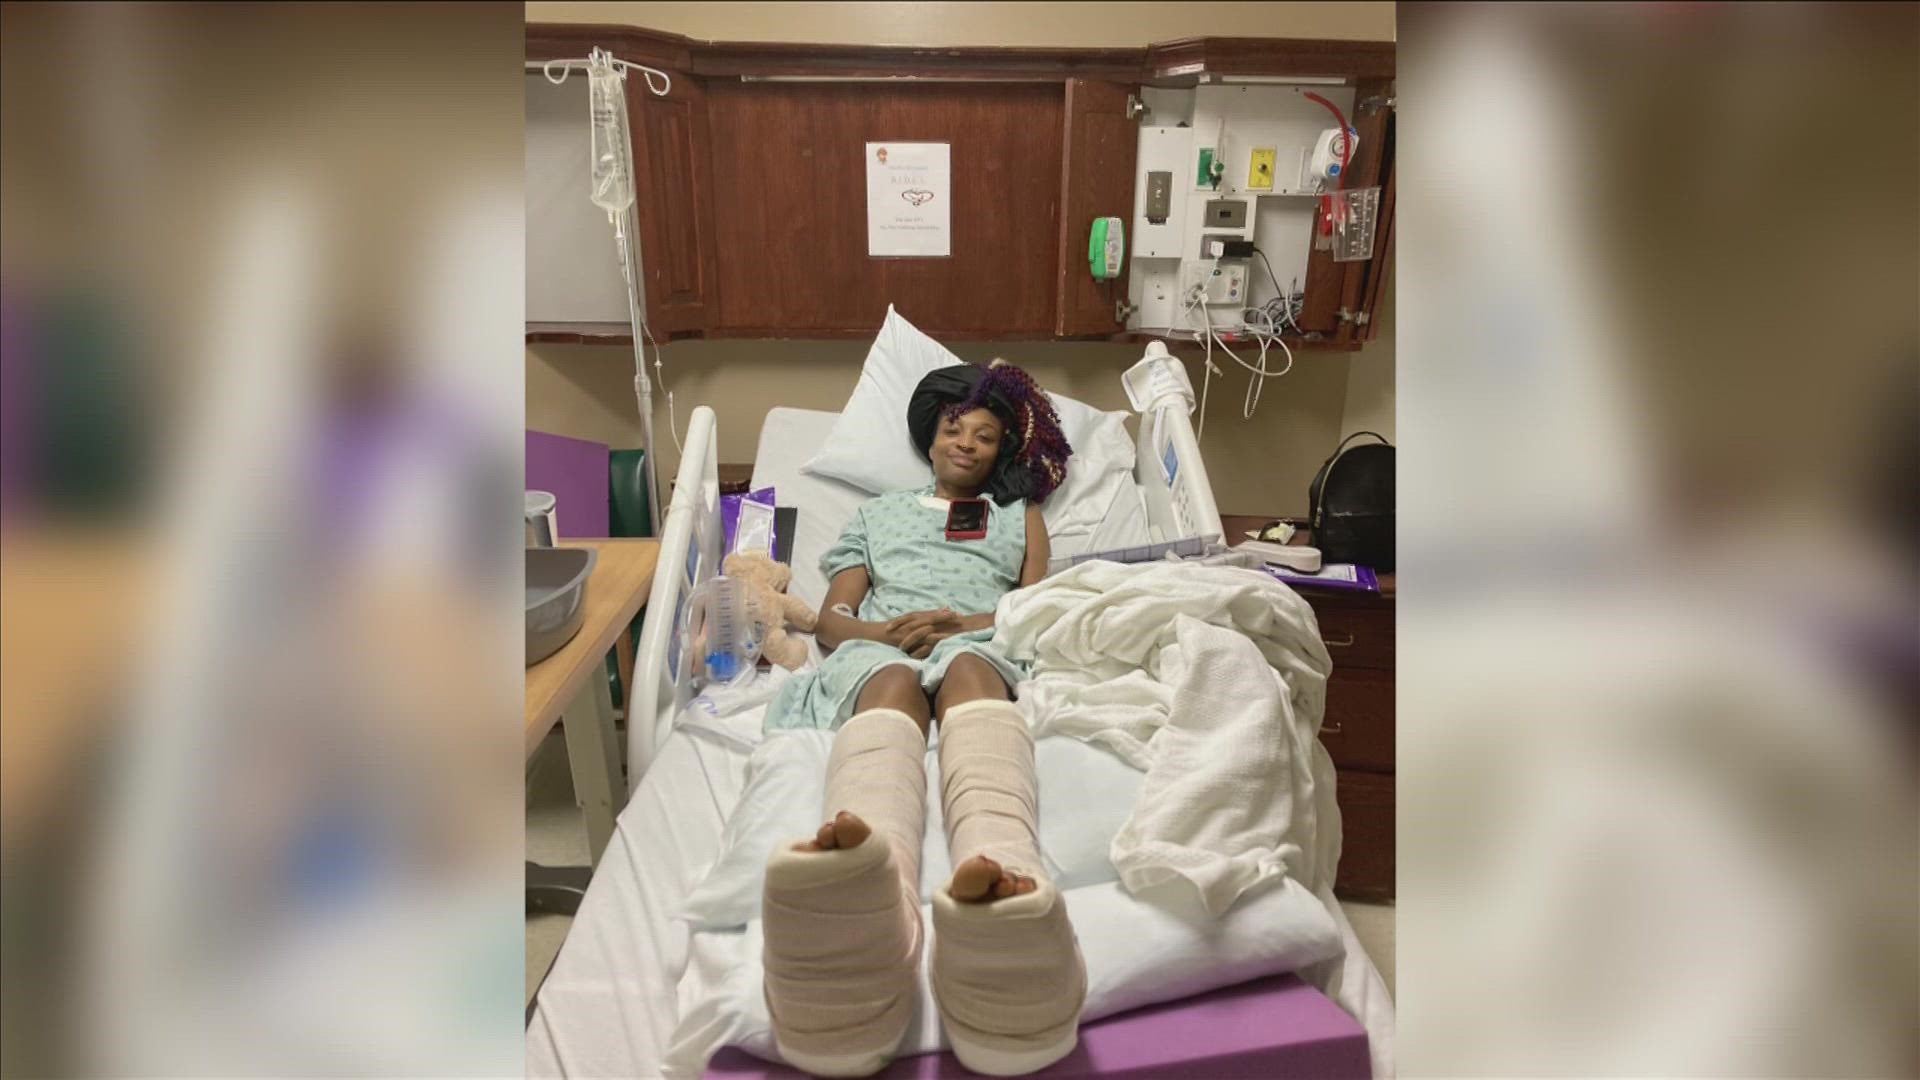 Taeja survived a serious hit-and-run accident, and she is now on the slow road to recovery.